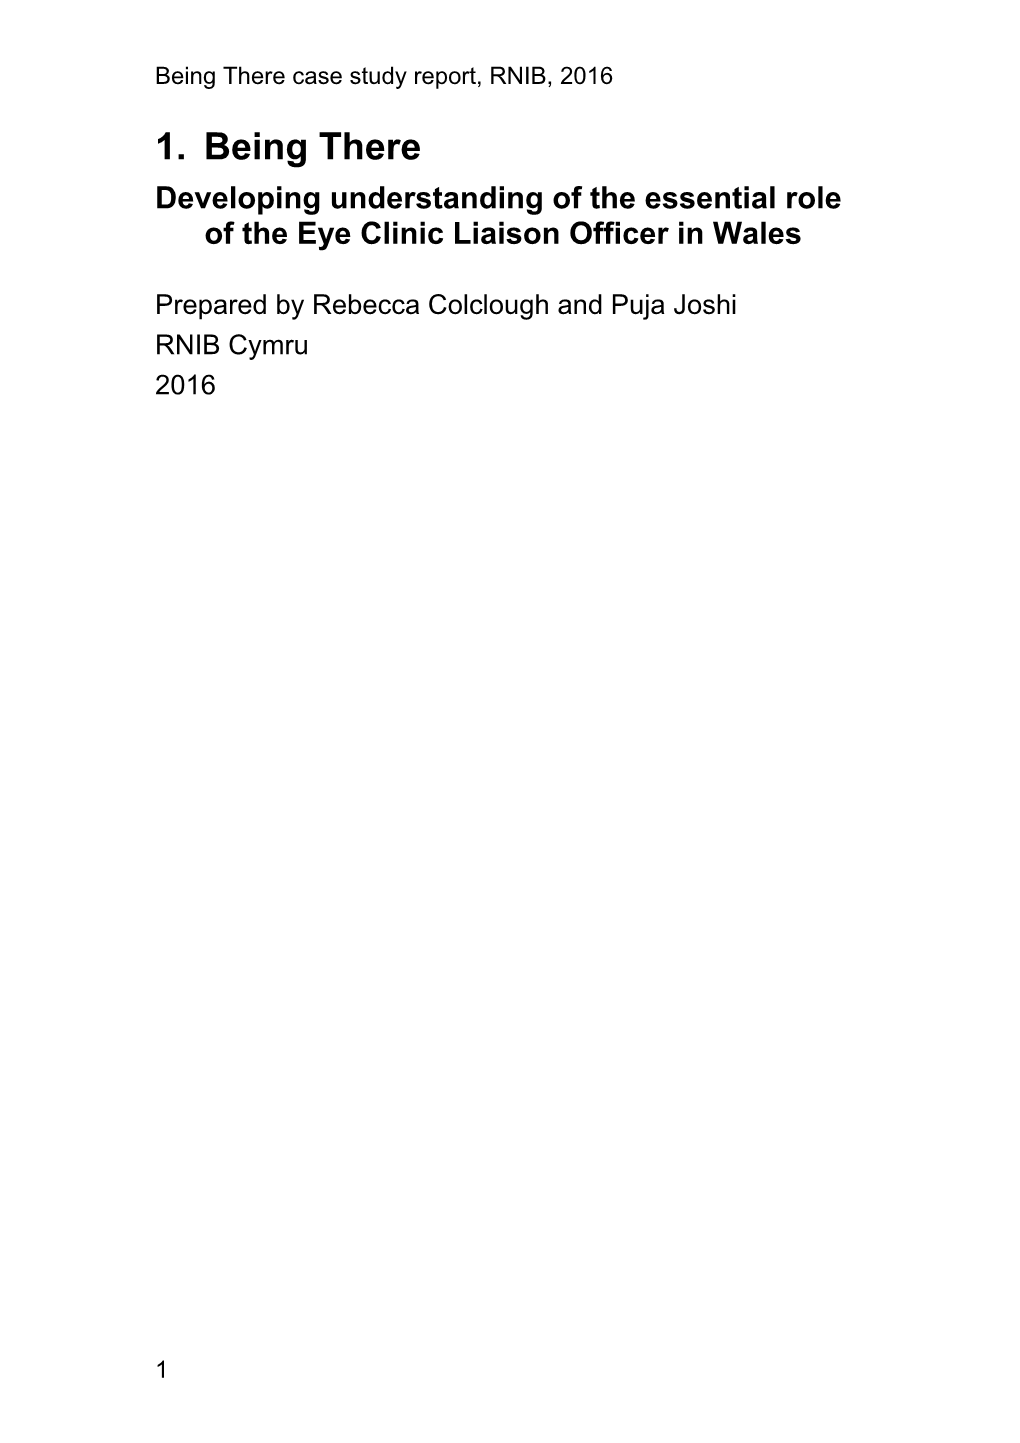 Developing Understanding of the Essential Role of the Eye Clinic Liaison Officer in Wales